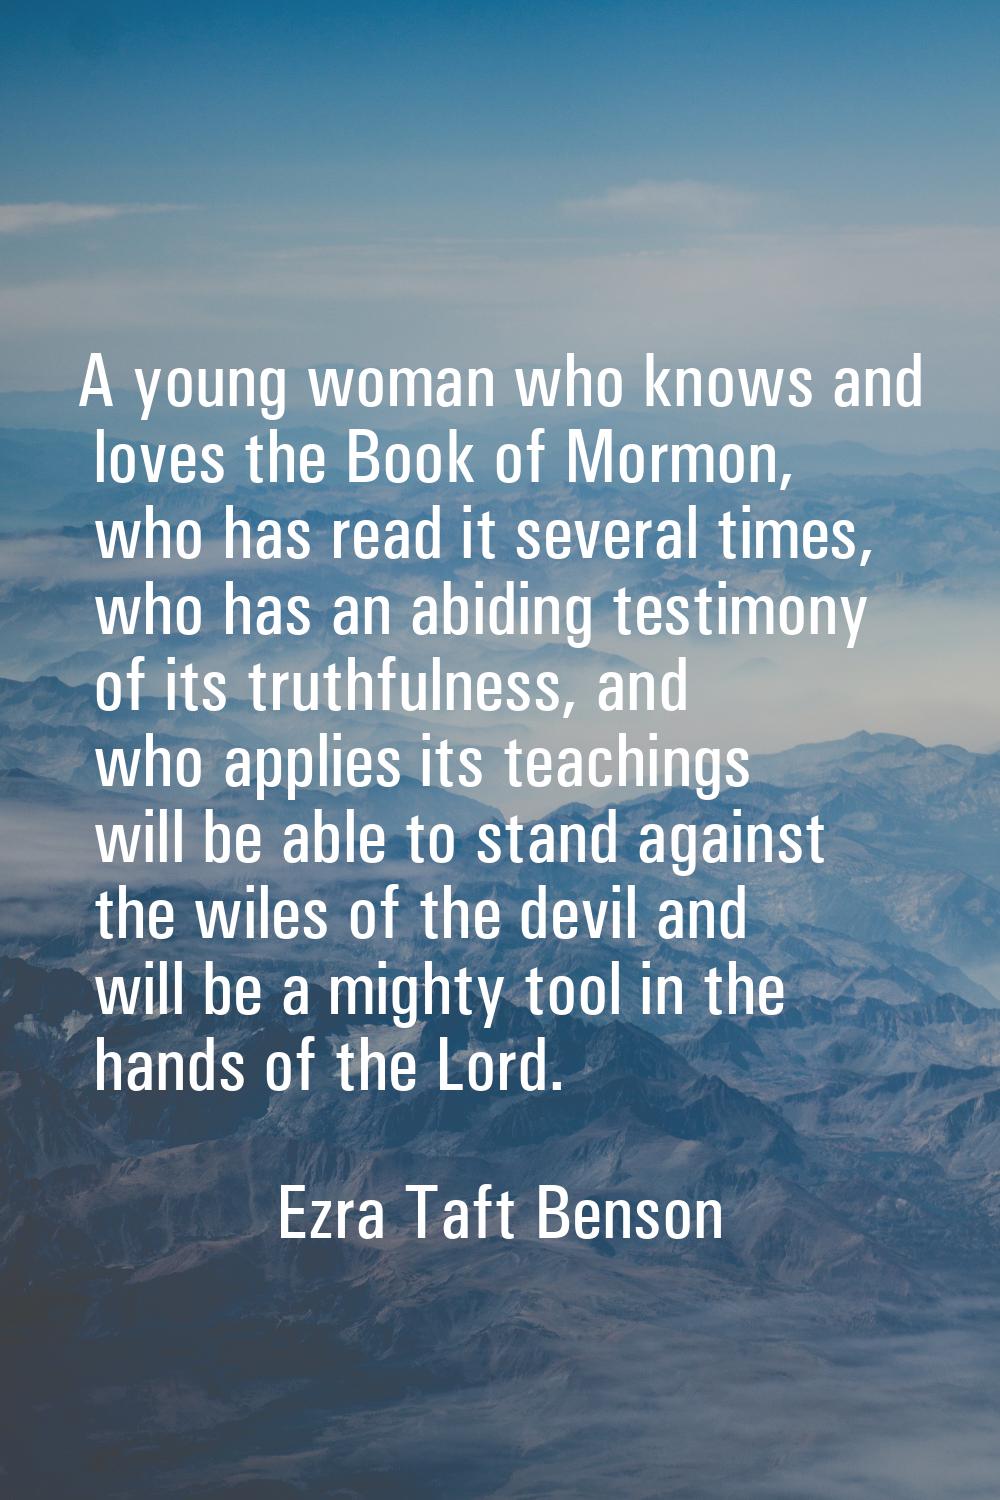 A young woman who knows and loves the Book of Mormon, who has read it several times, who has an abi